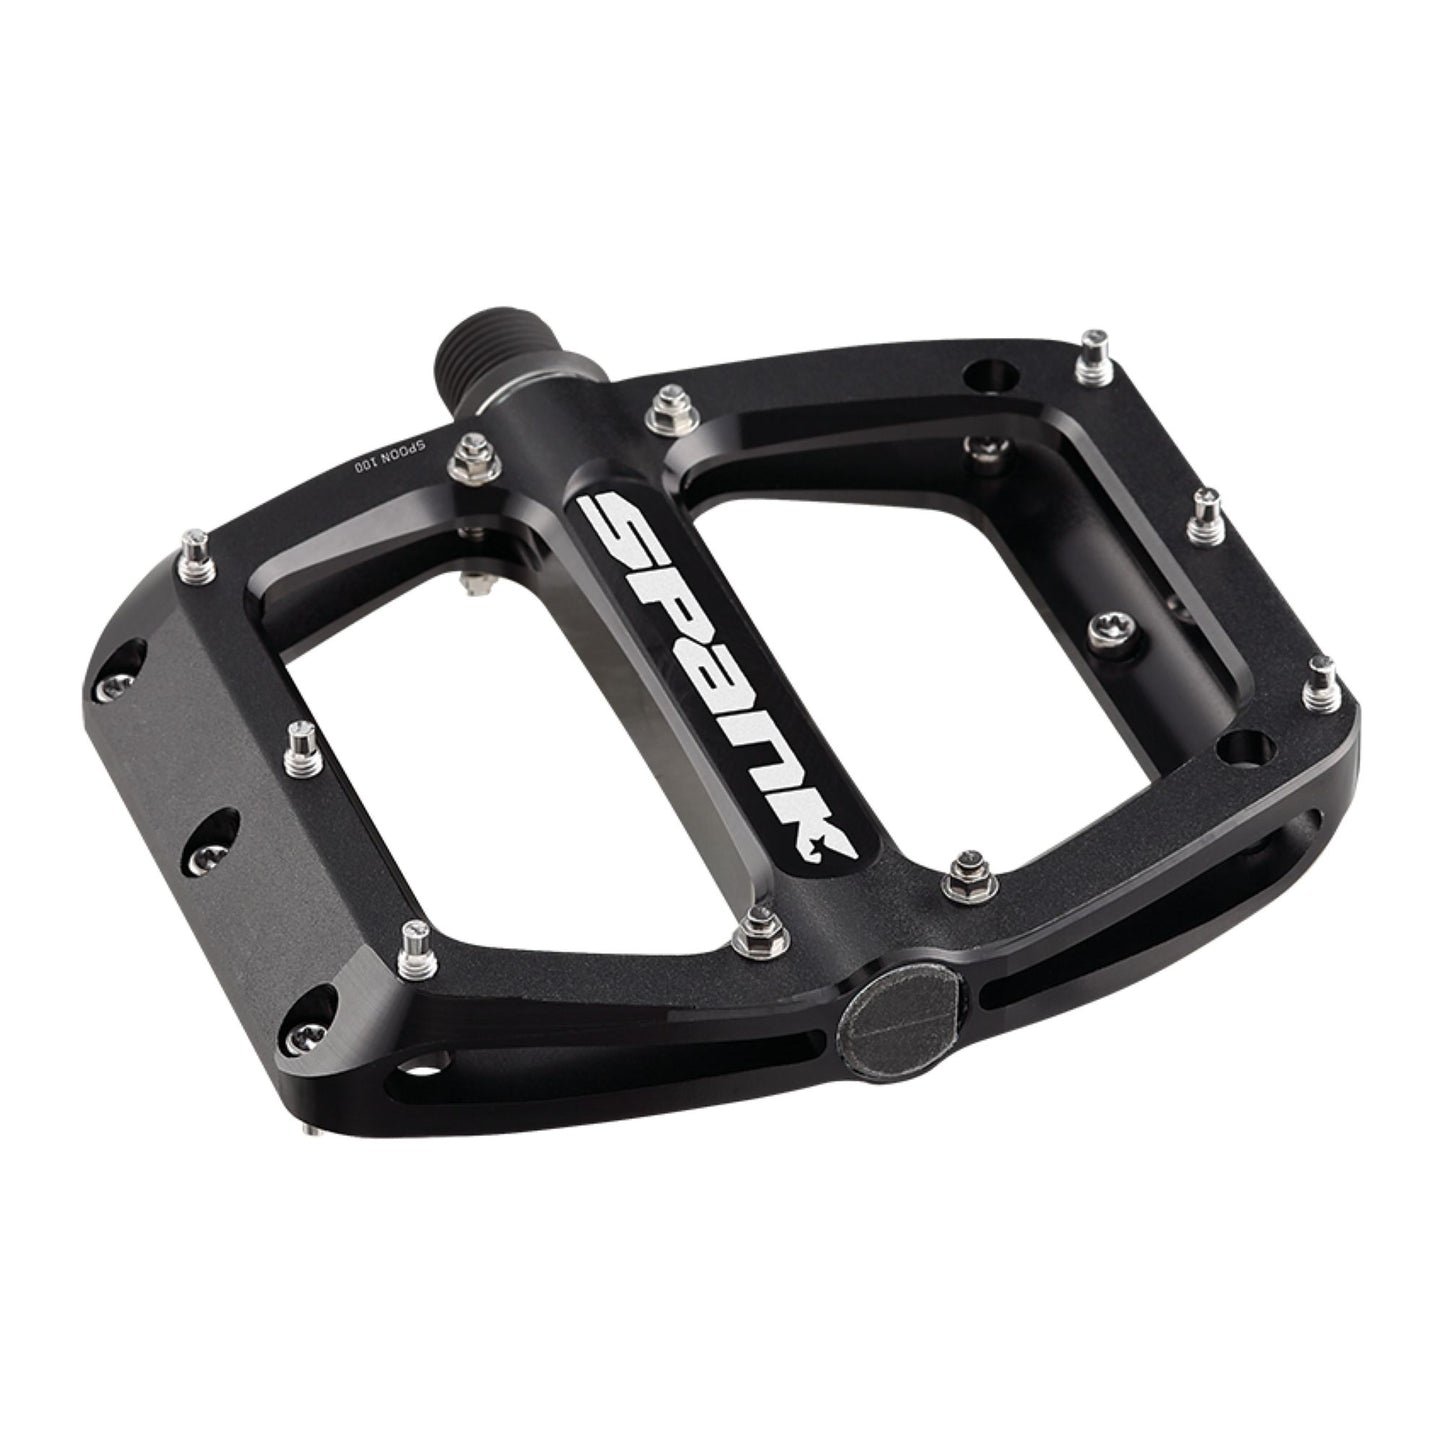 Spank Spoon 100 Pedals Black 100x105mm Pedals